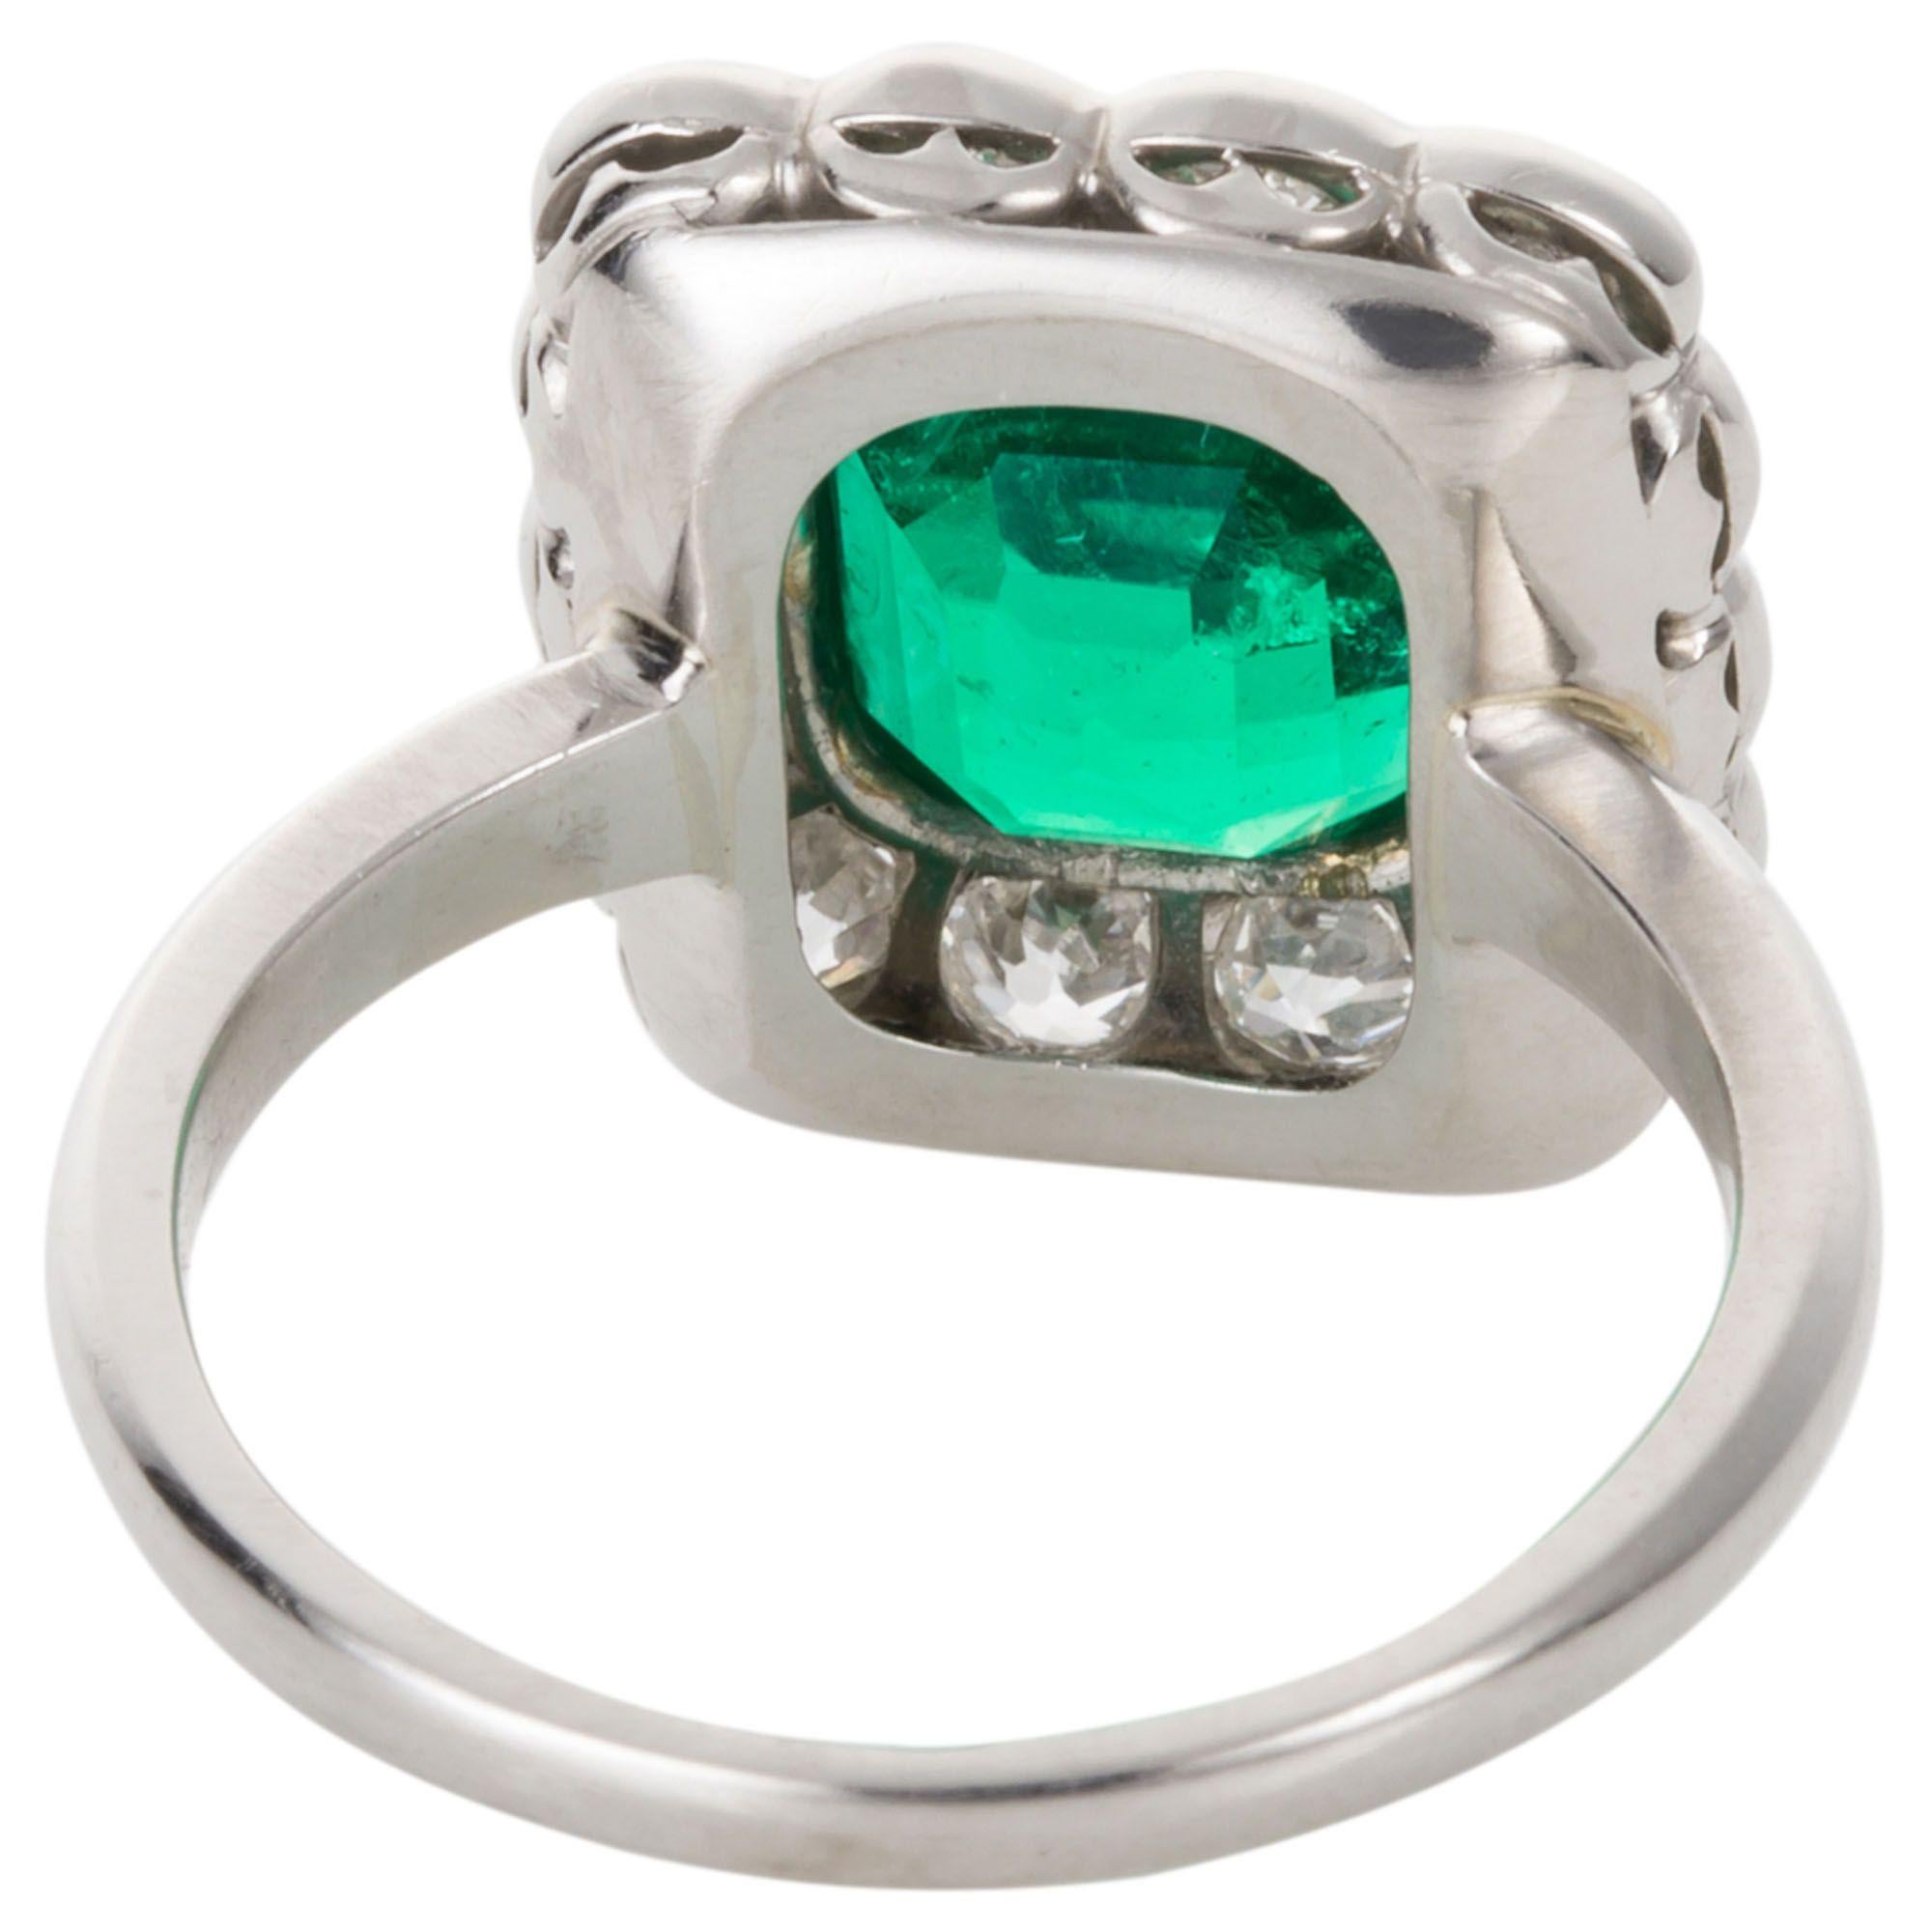 Emerald Cut 2.27 Carat GIA Certified Colombian Emerald and Diamond Platinum Ring For Sale